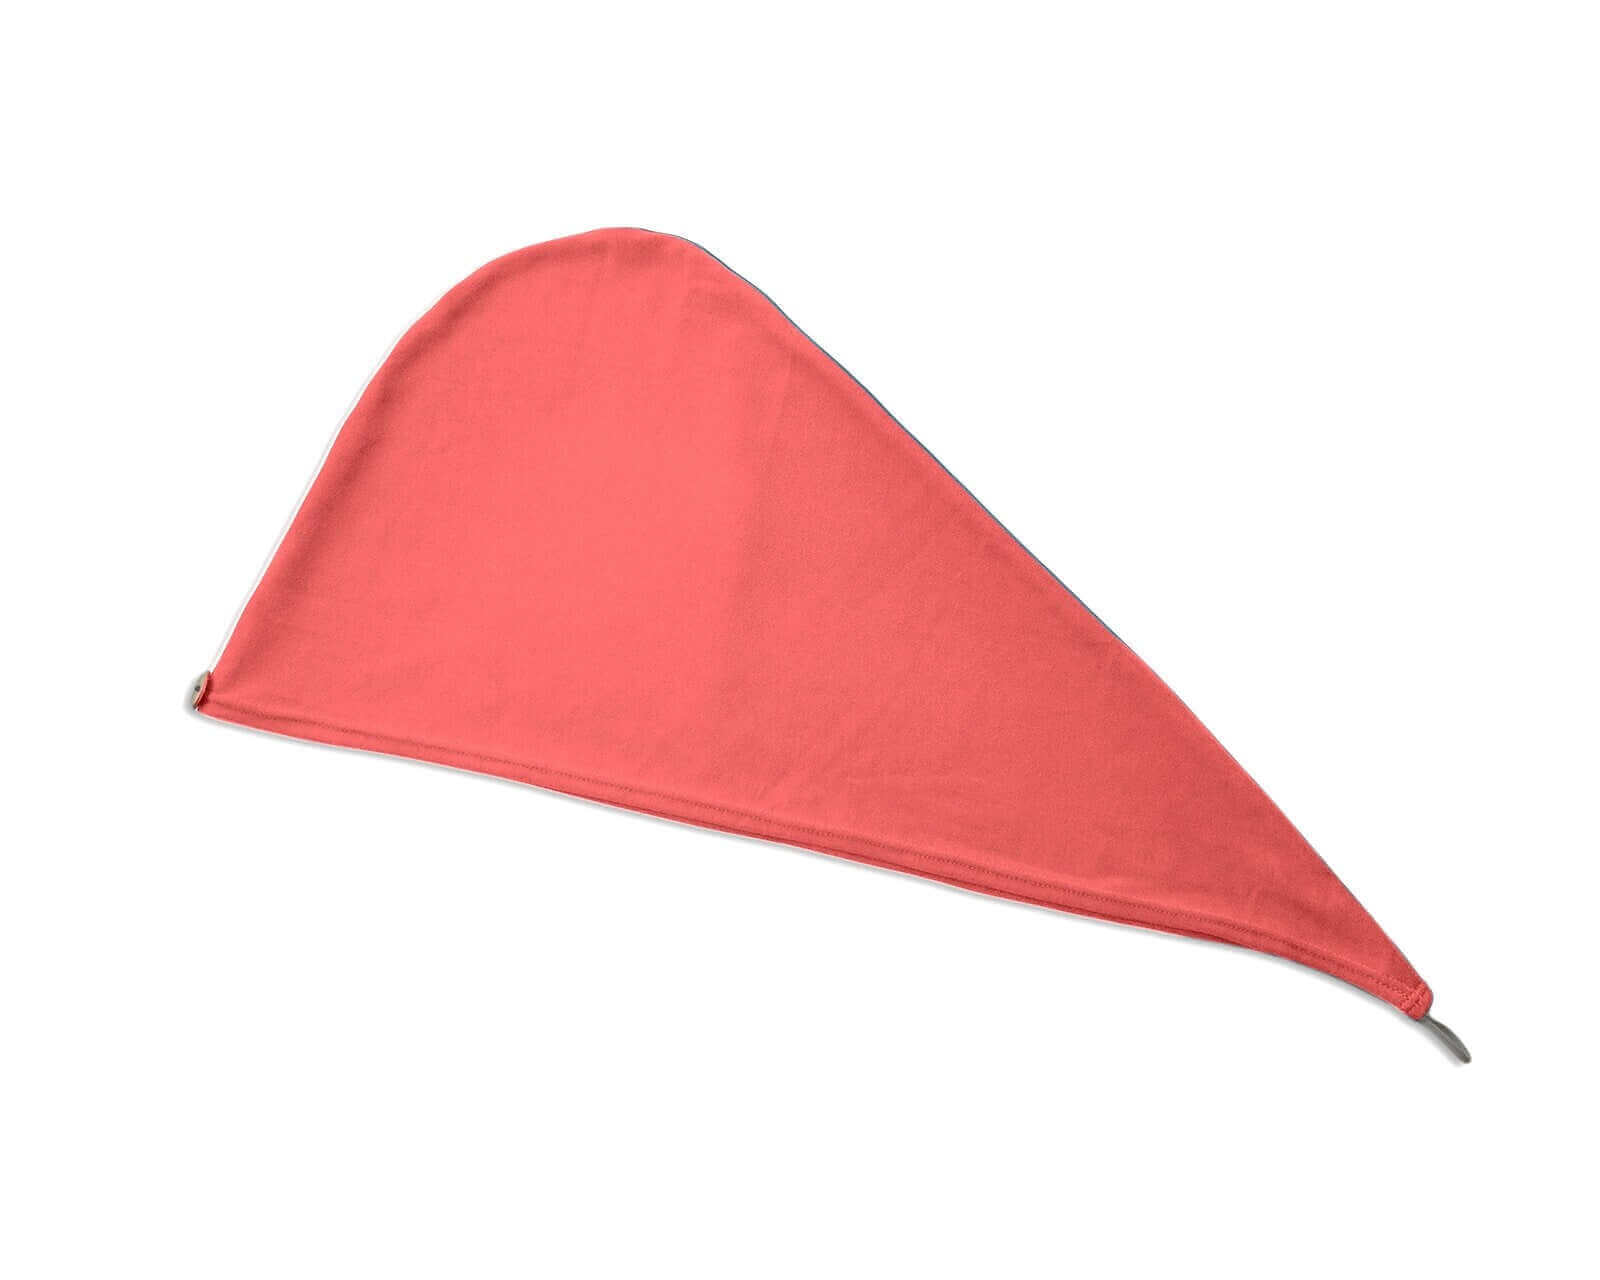 Coral T-Shirt Hair Towel Hood for Curly, Wavy, and Straight Hair - Soft, Absorbent, and Eco-Friendly